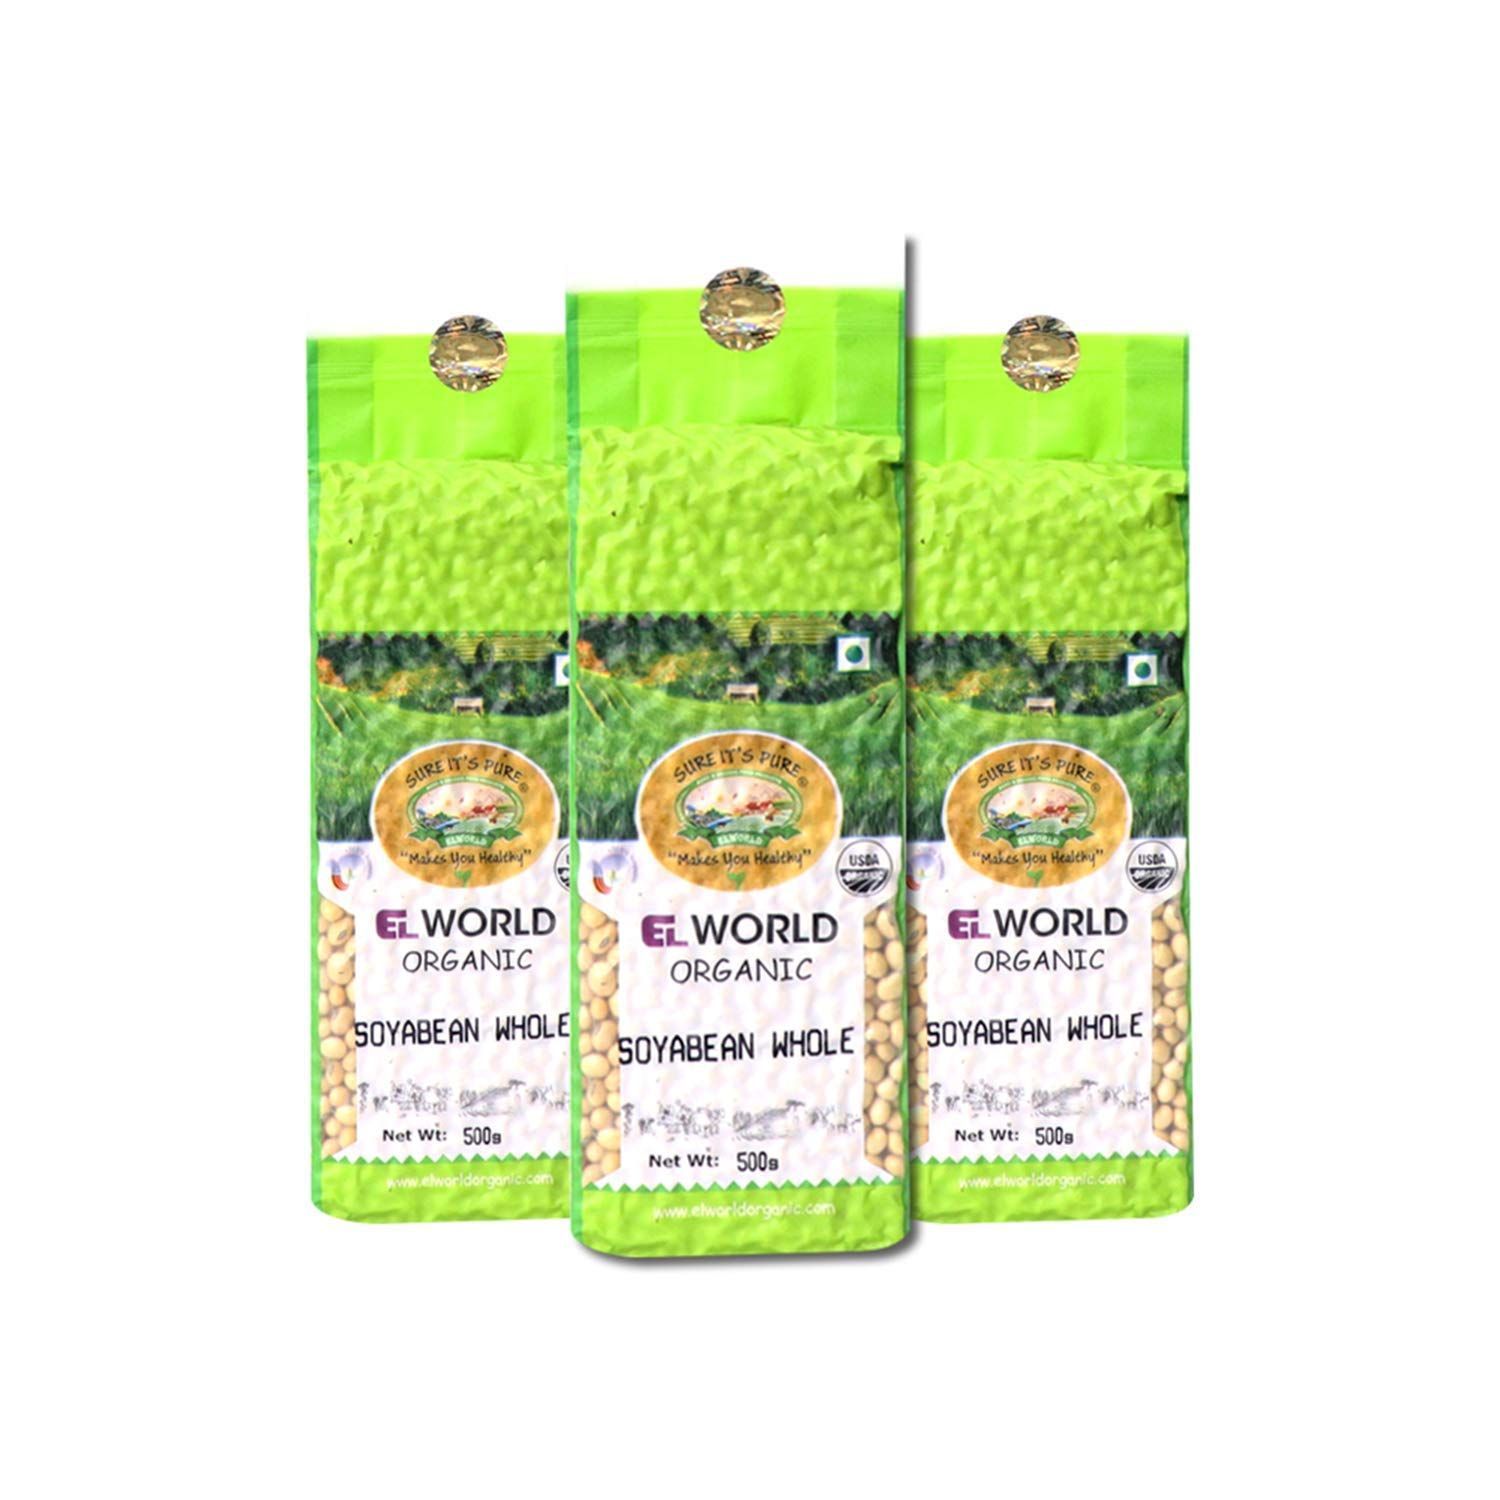 ELWORLD AGRO & ORGANIC FOOD PRODUCTS Soyabean Whole 500 g X 3 (Pack of 3)